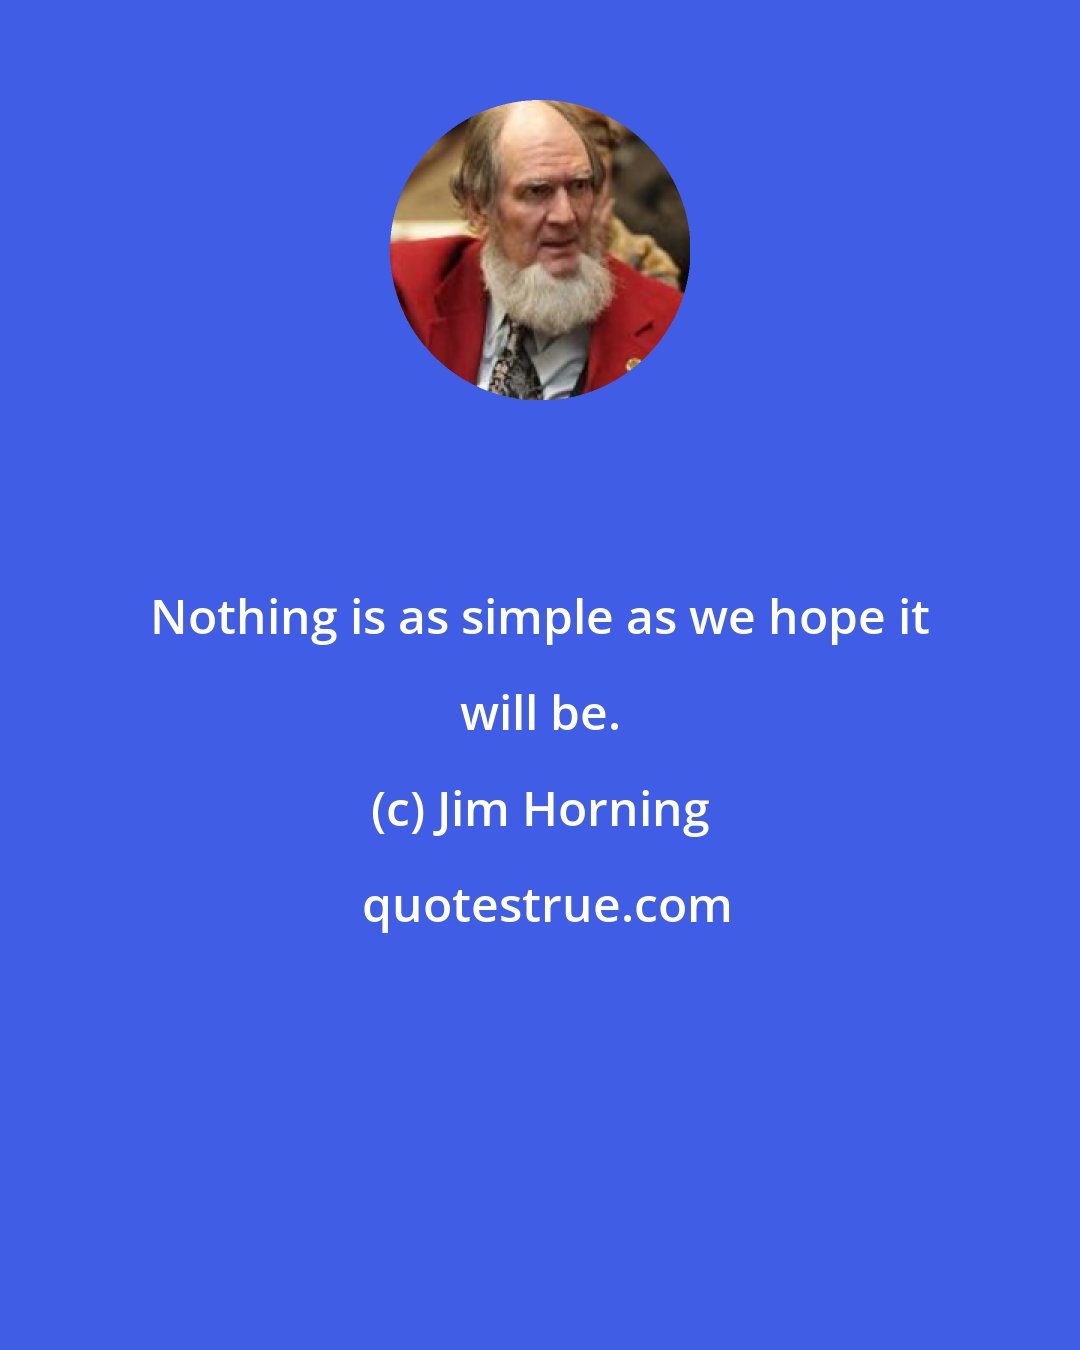 Jim Horning: Nothing is as simple as we hope it will be.